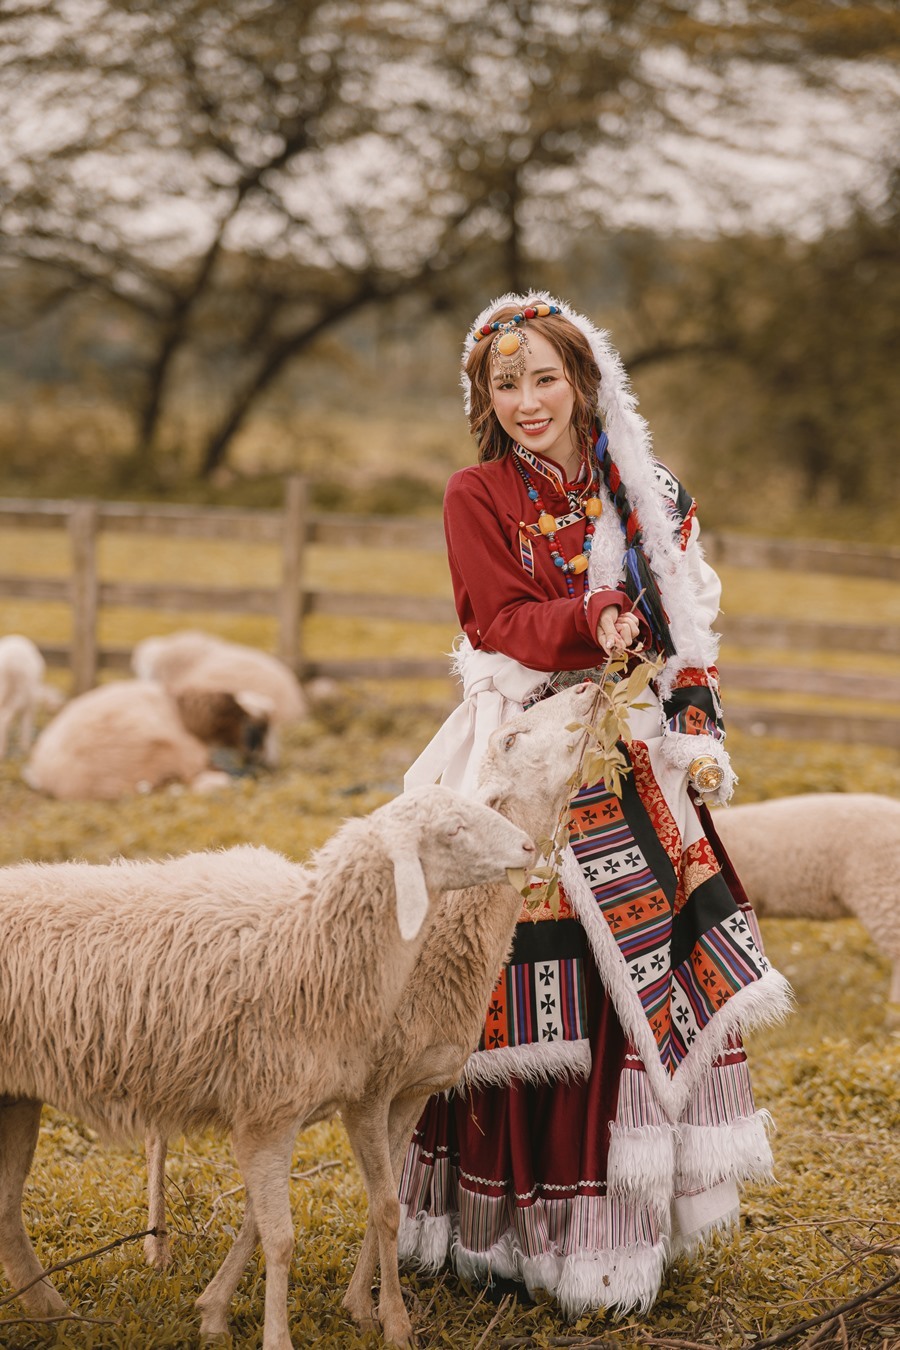 Quynh Nga is attractive and hard to take her eyes off when hugging sheep and arching